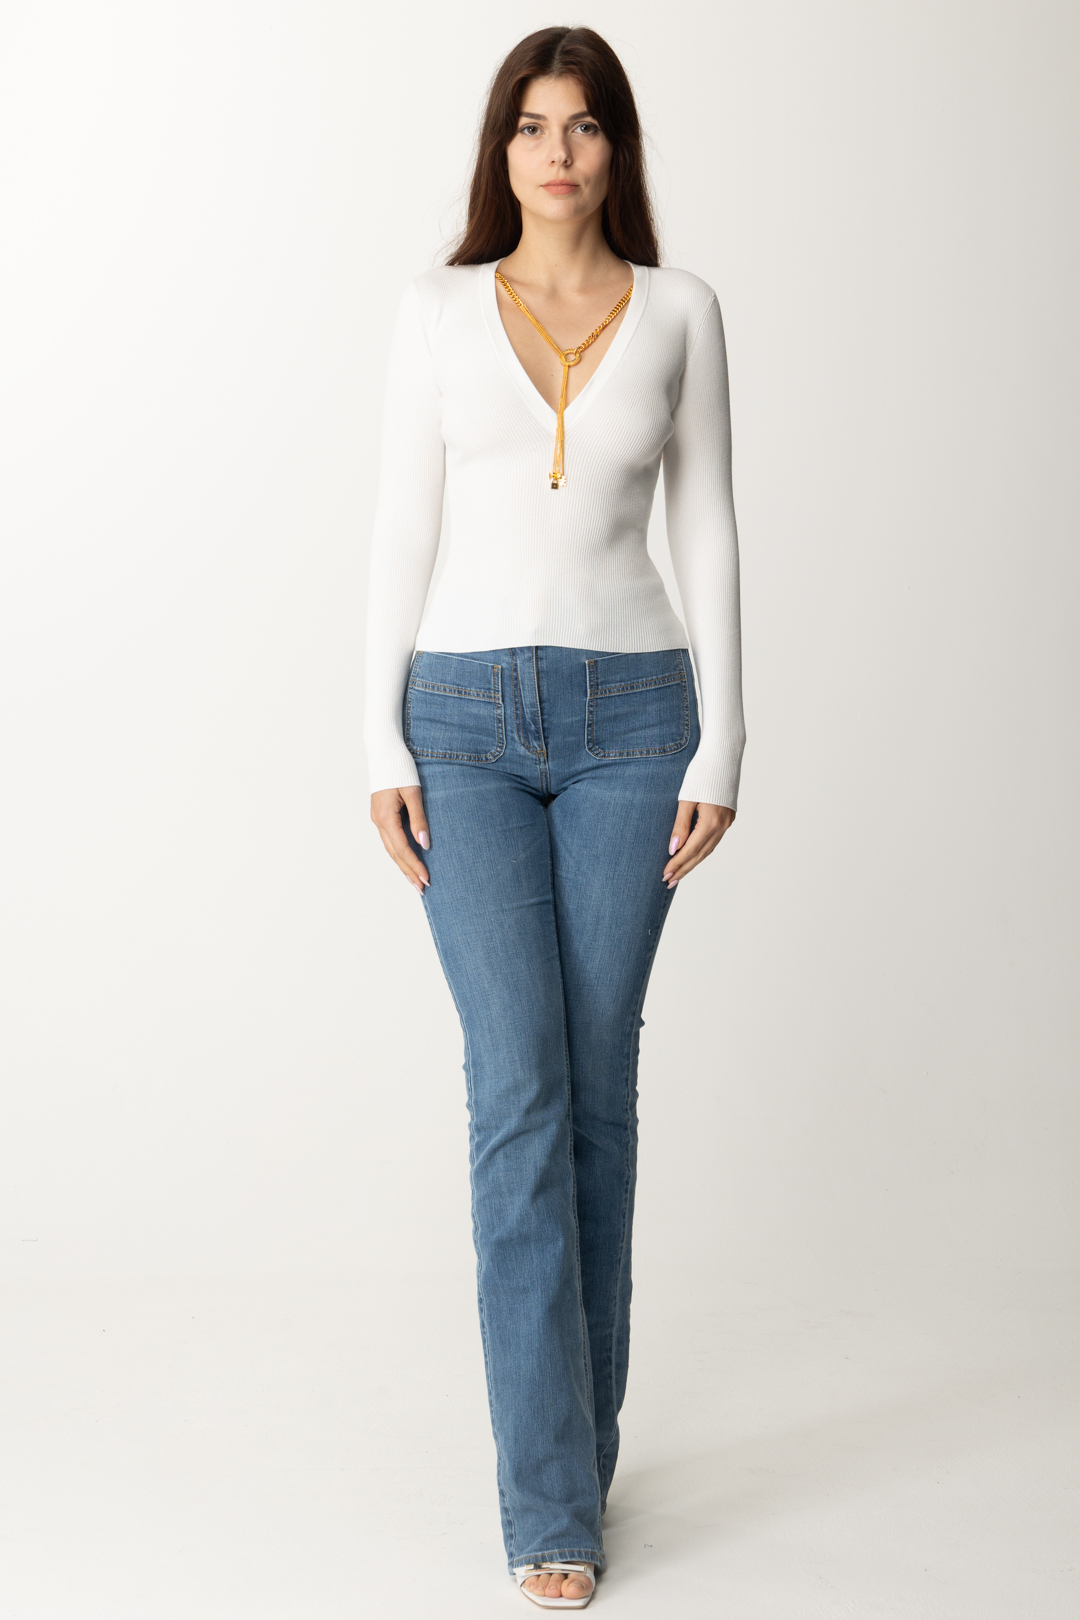 Preview: Elisabetta Franchi Ribbed top with necklace Avorio